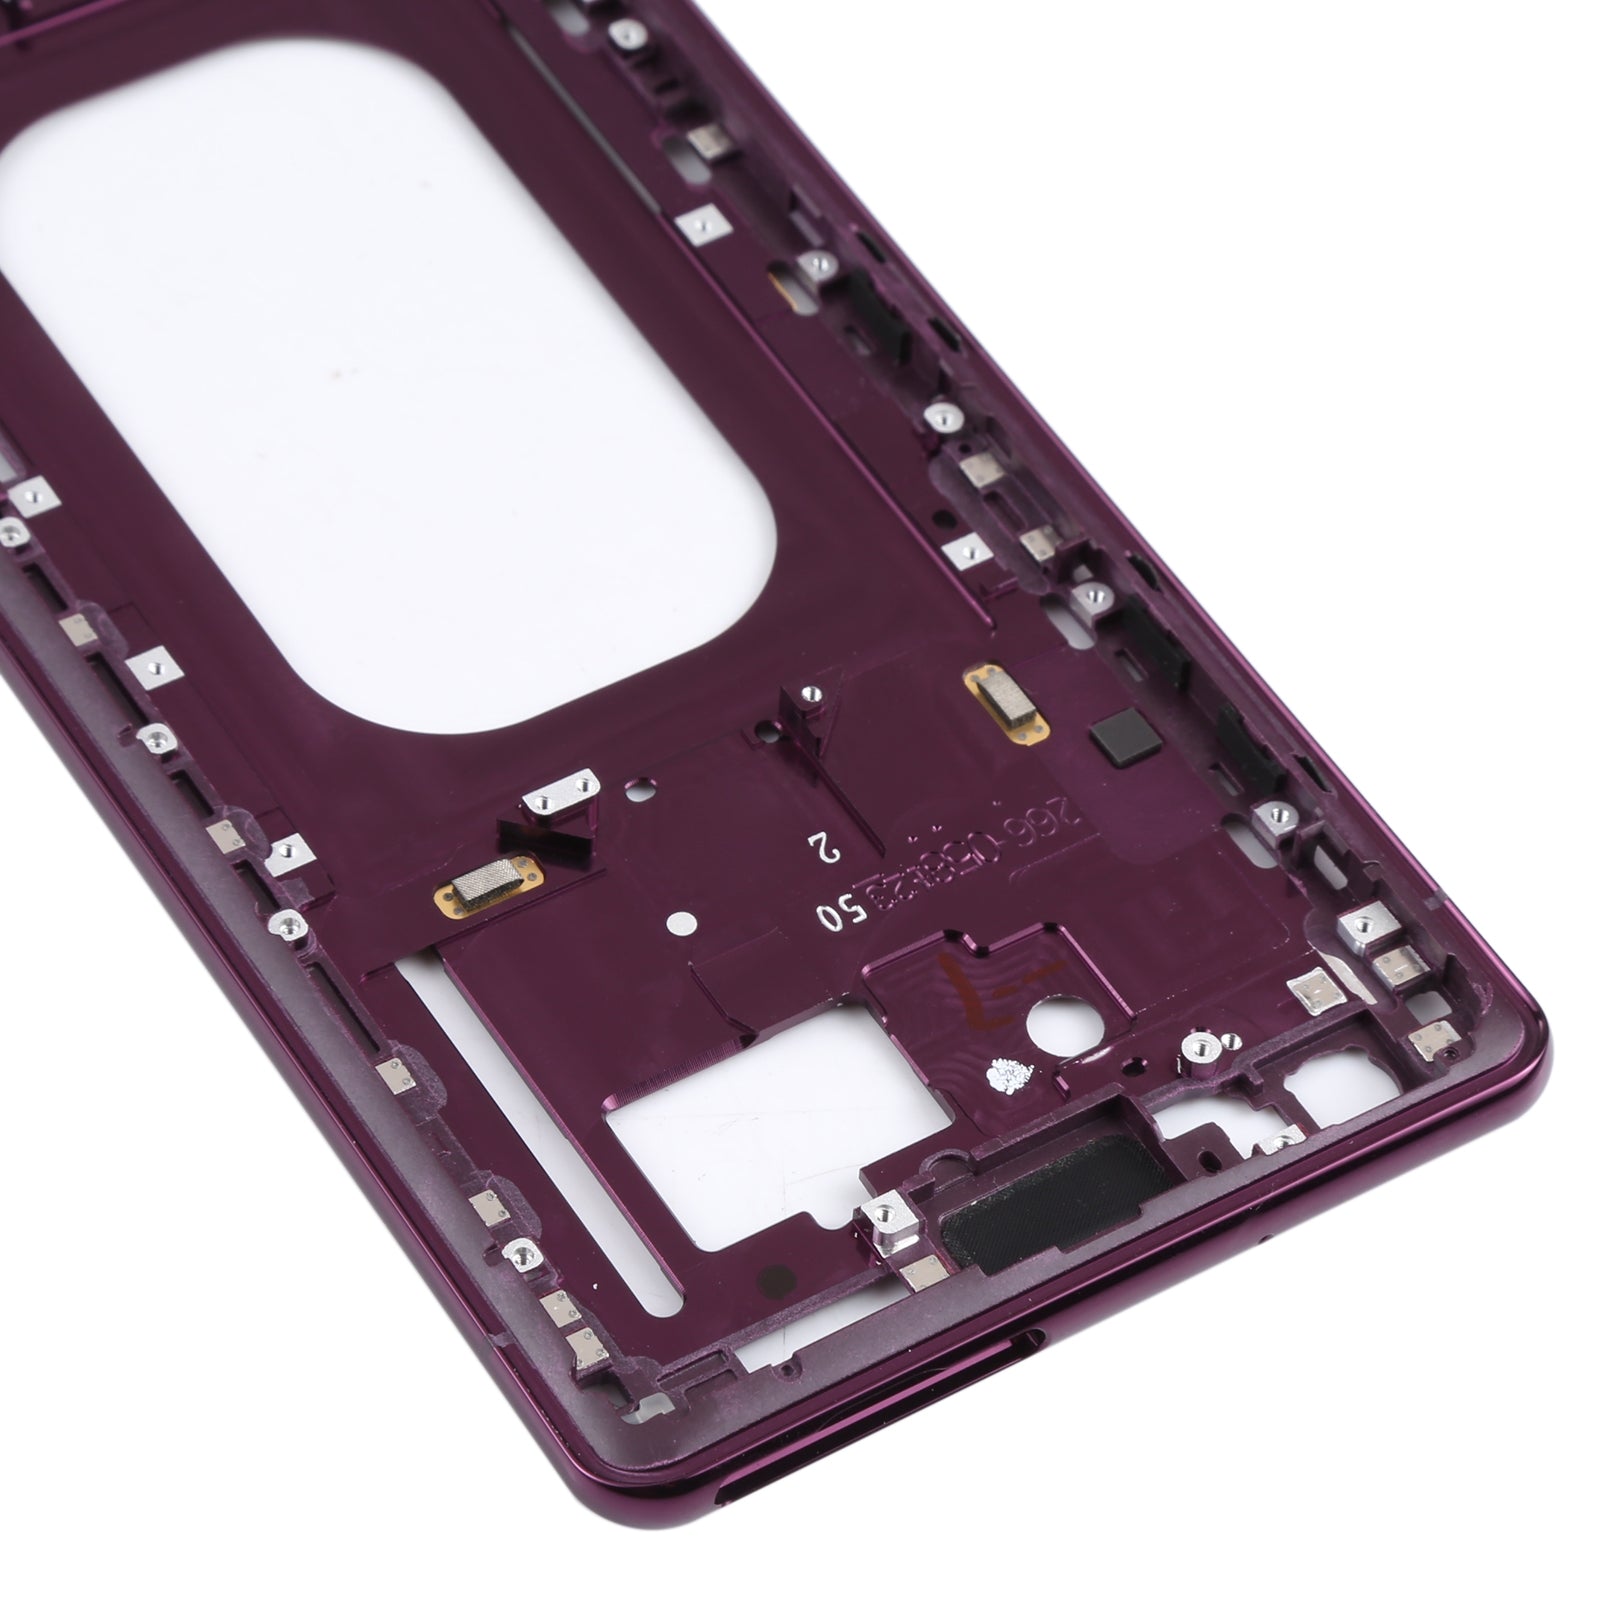 Chassis Back Housing Frame Sony Xperia XZ3 Purple